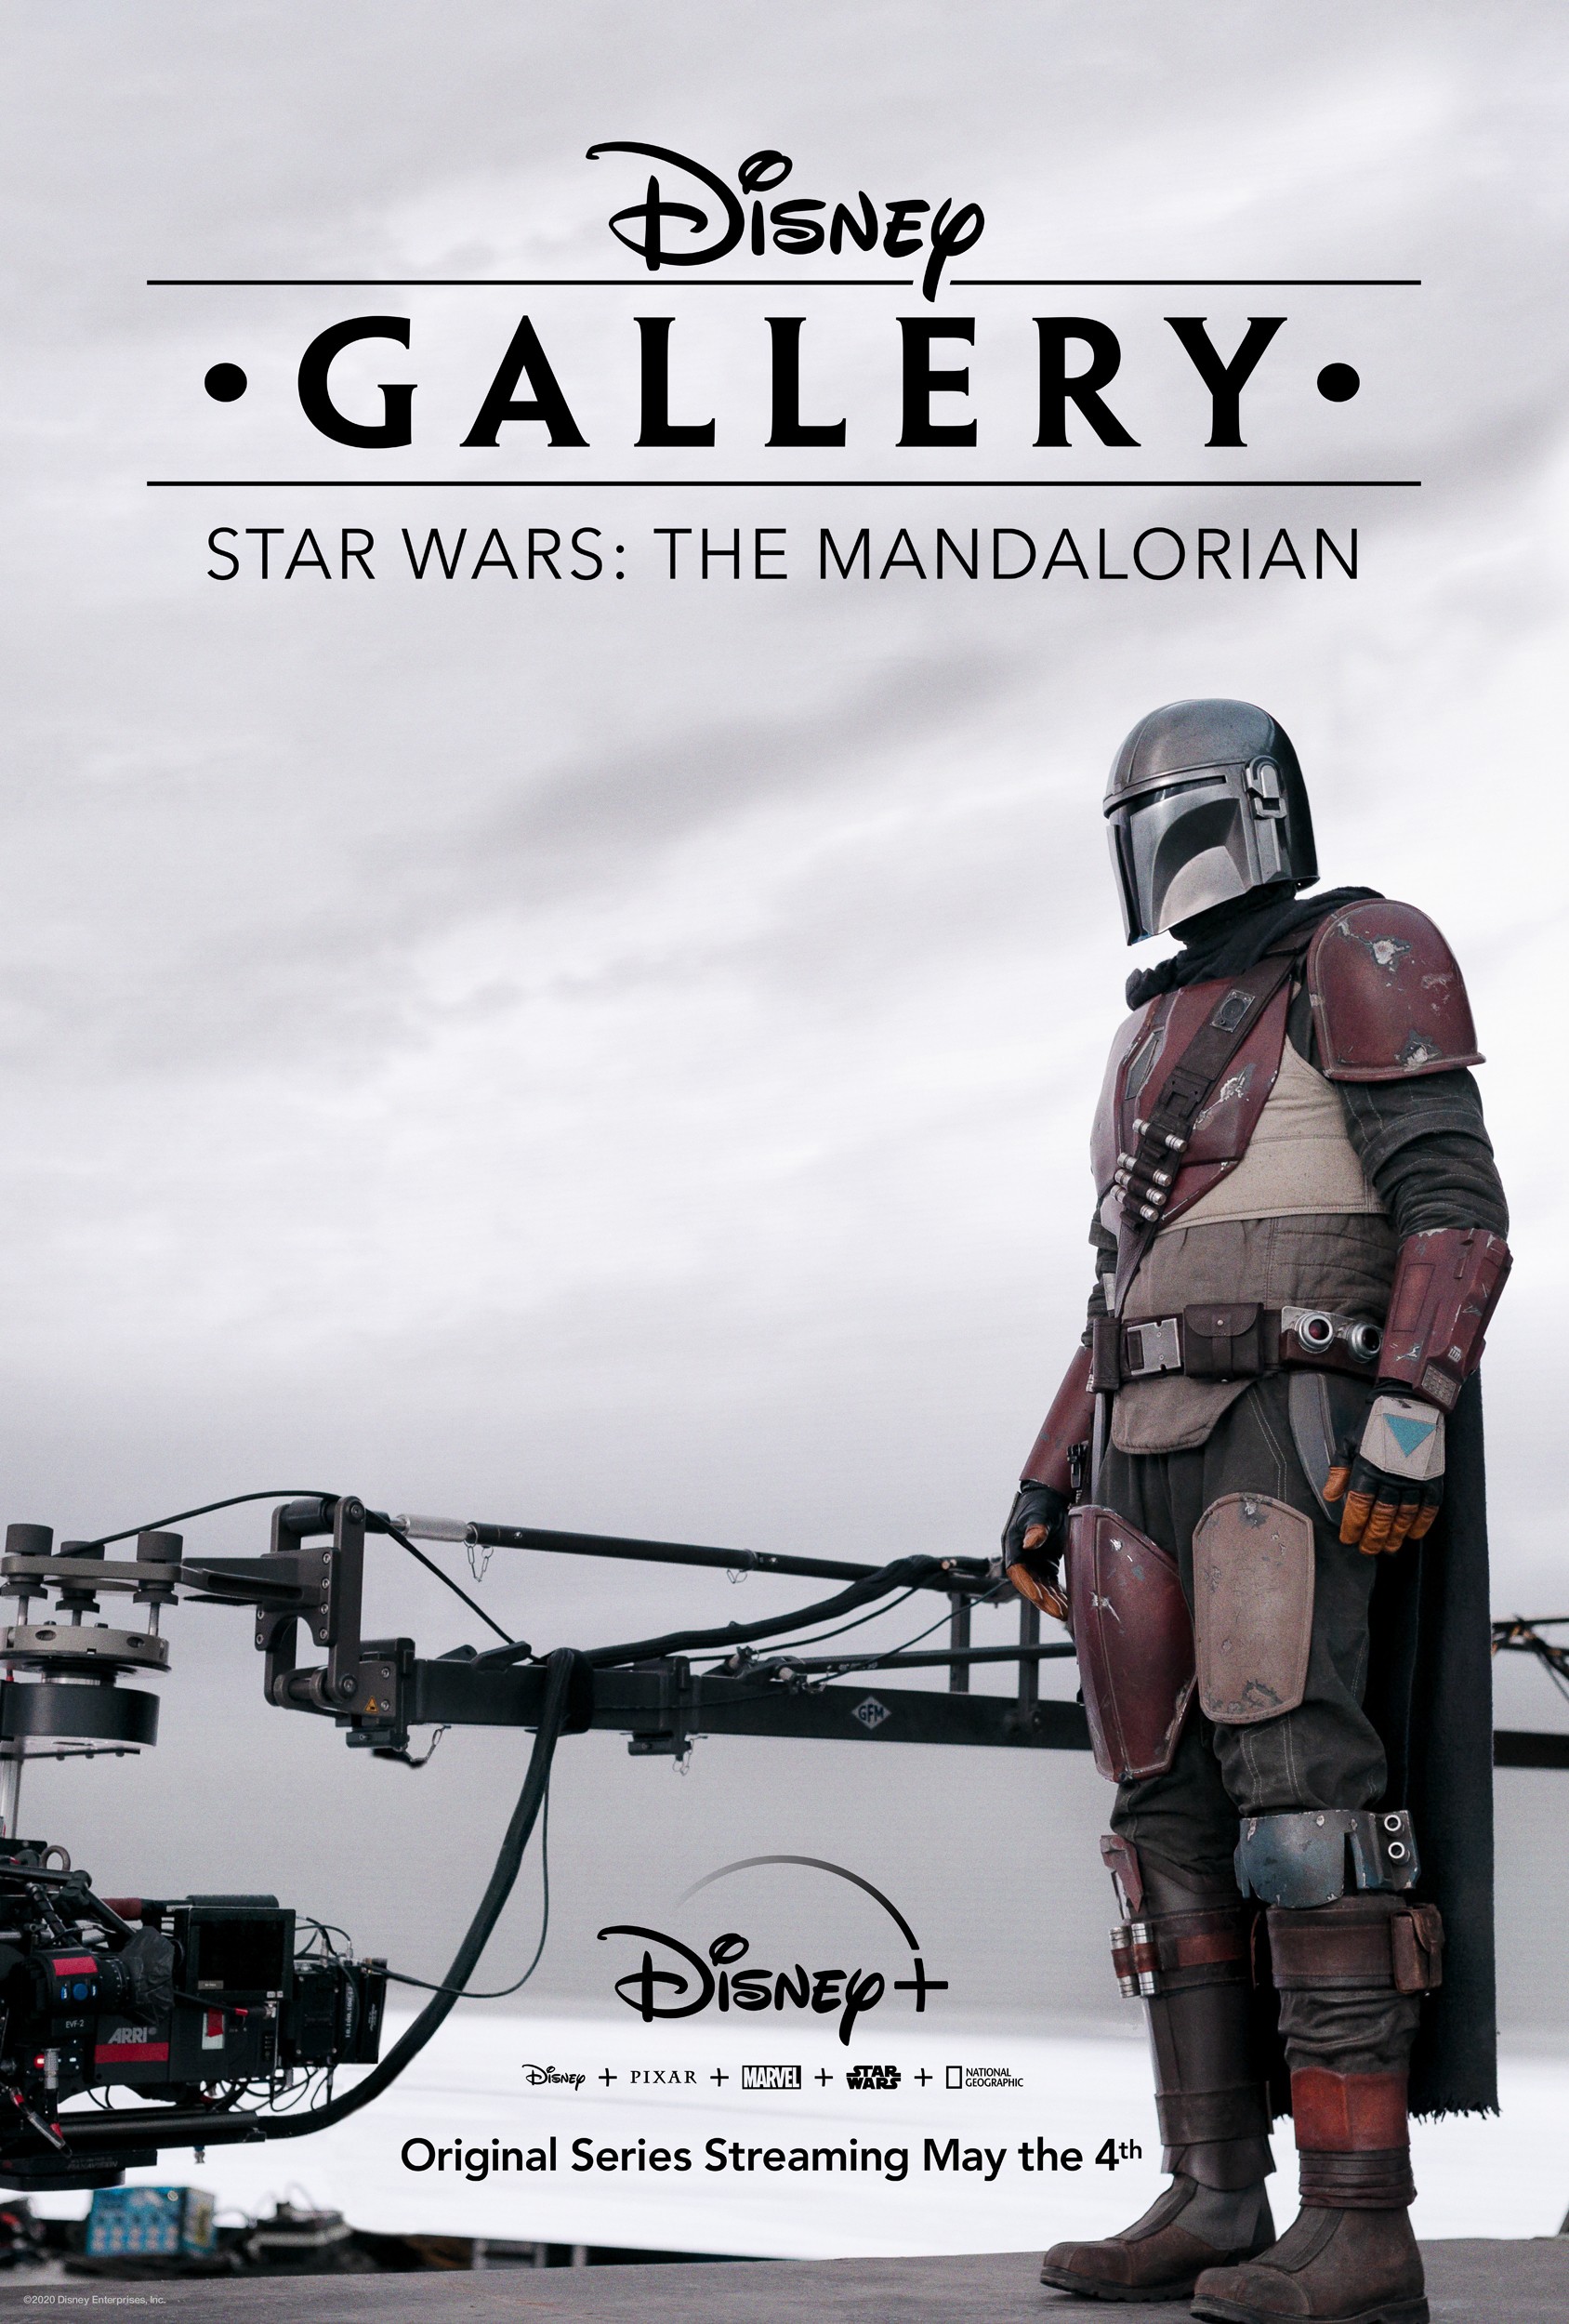 Rotten Tomatoes - The official poster for The Mandalorian